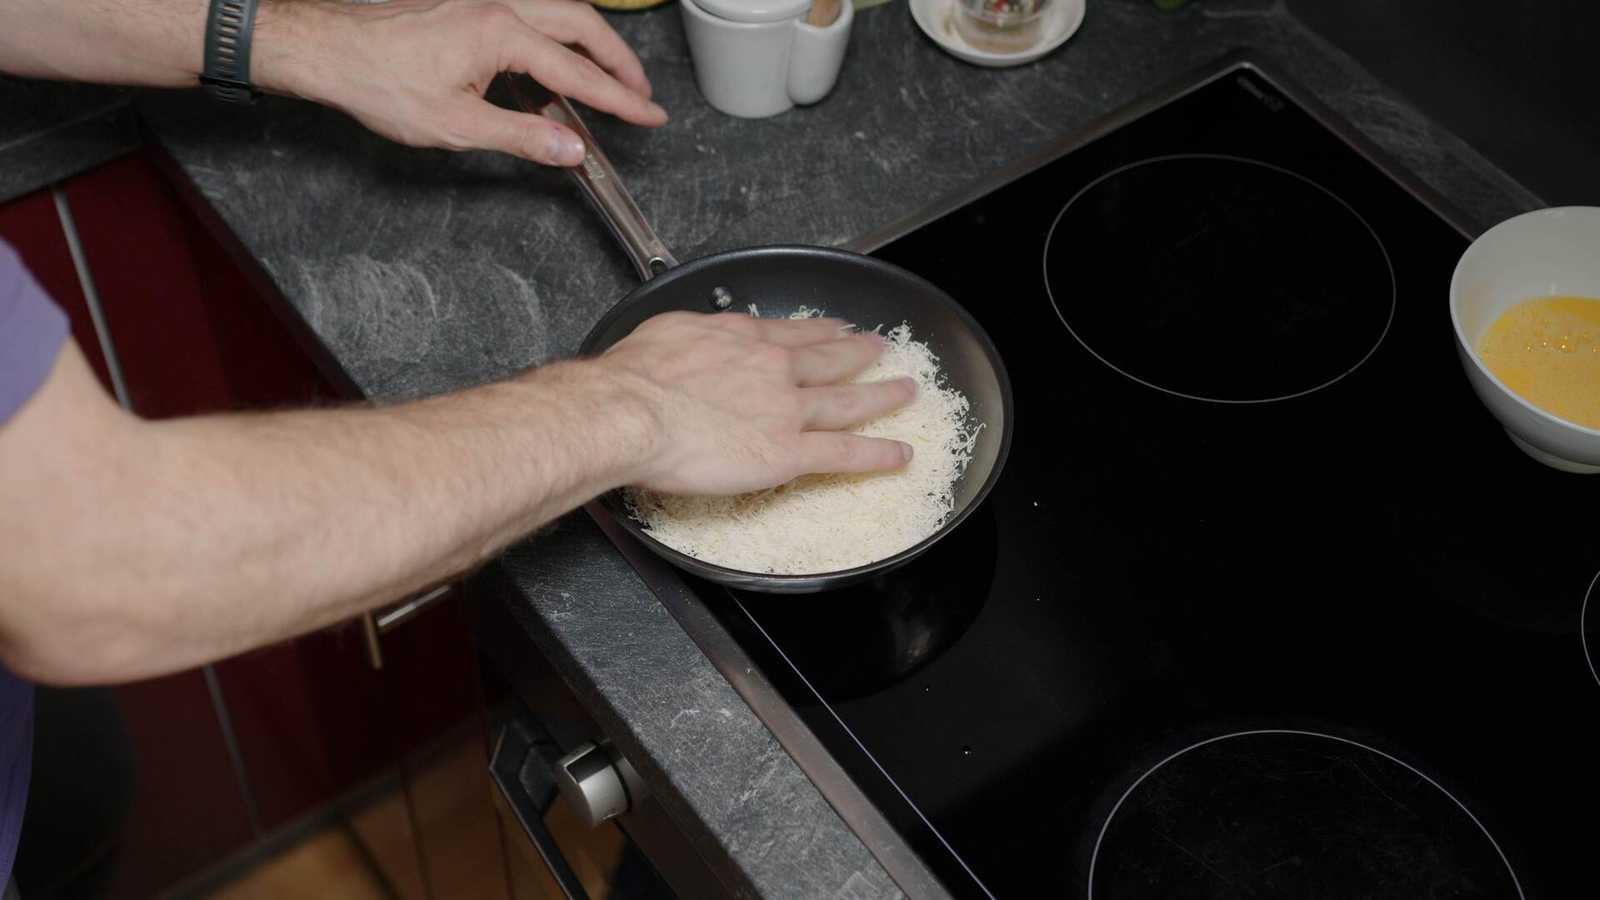 Parmesan being spread by hand